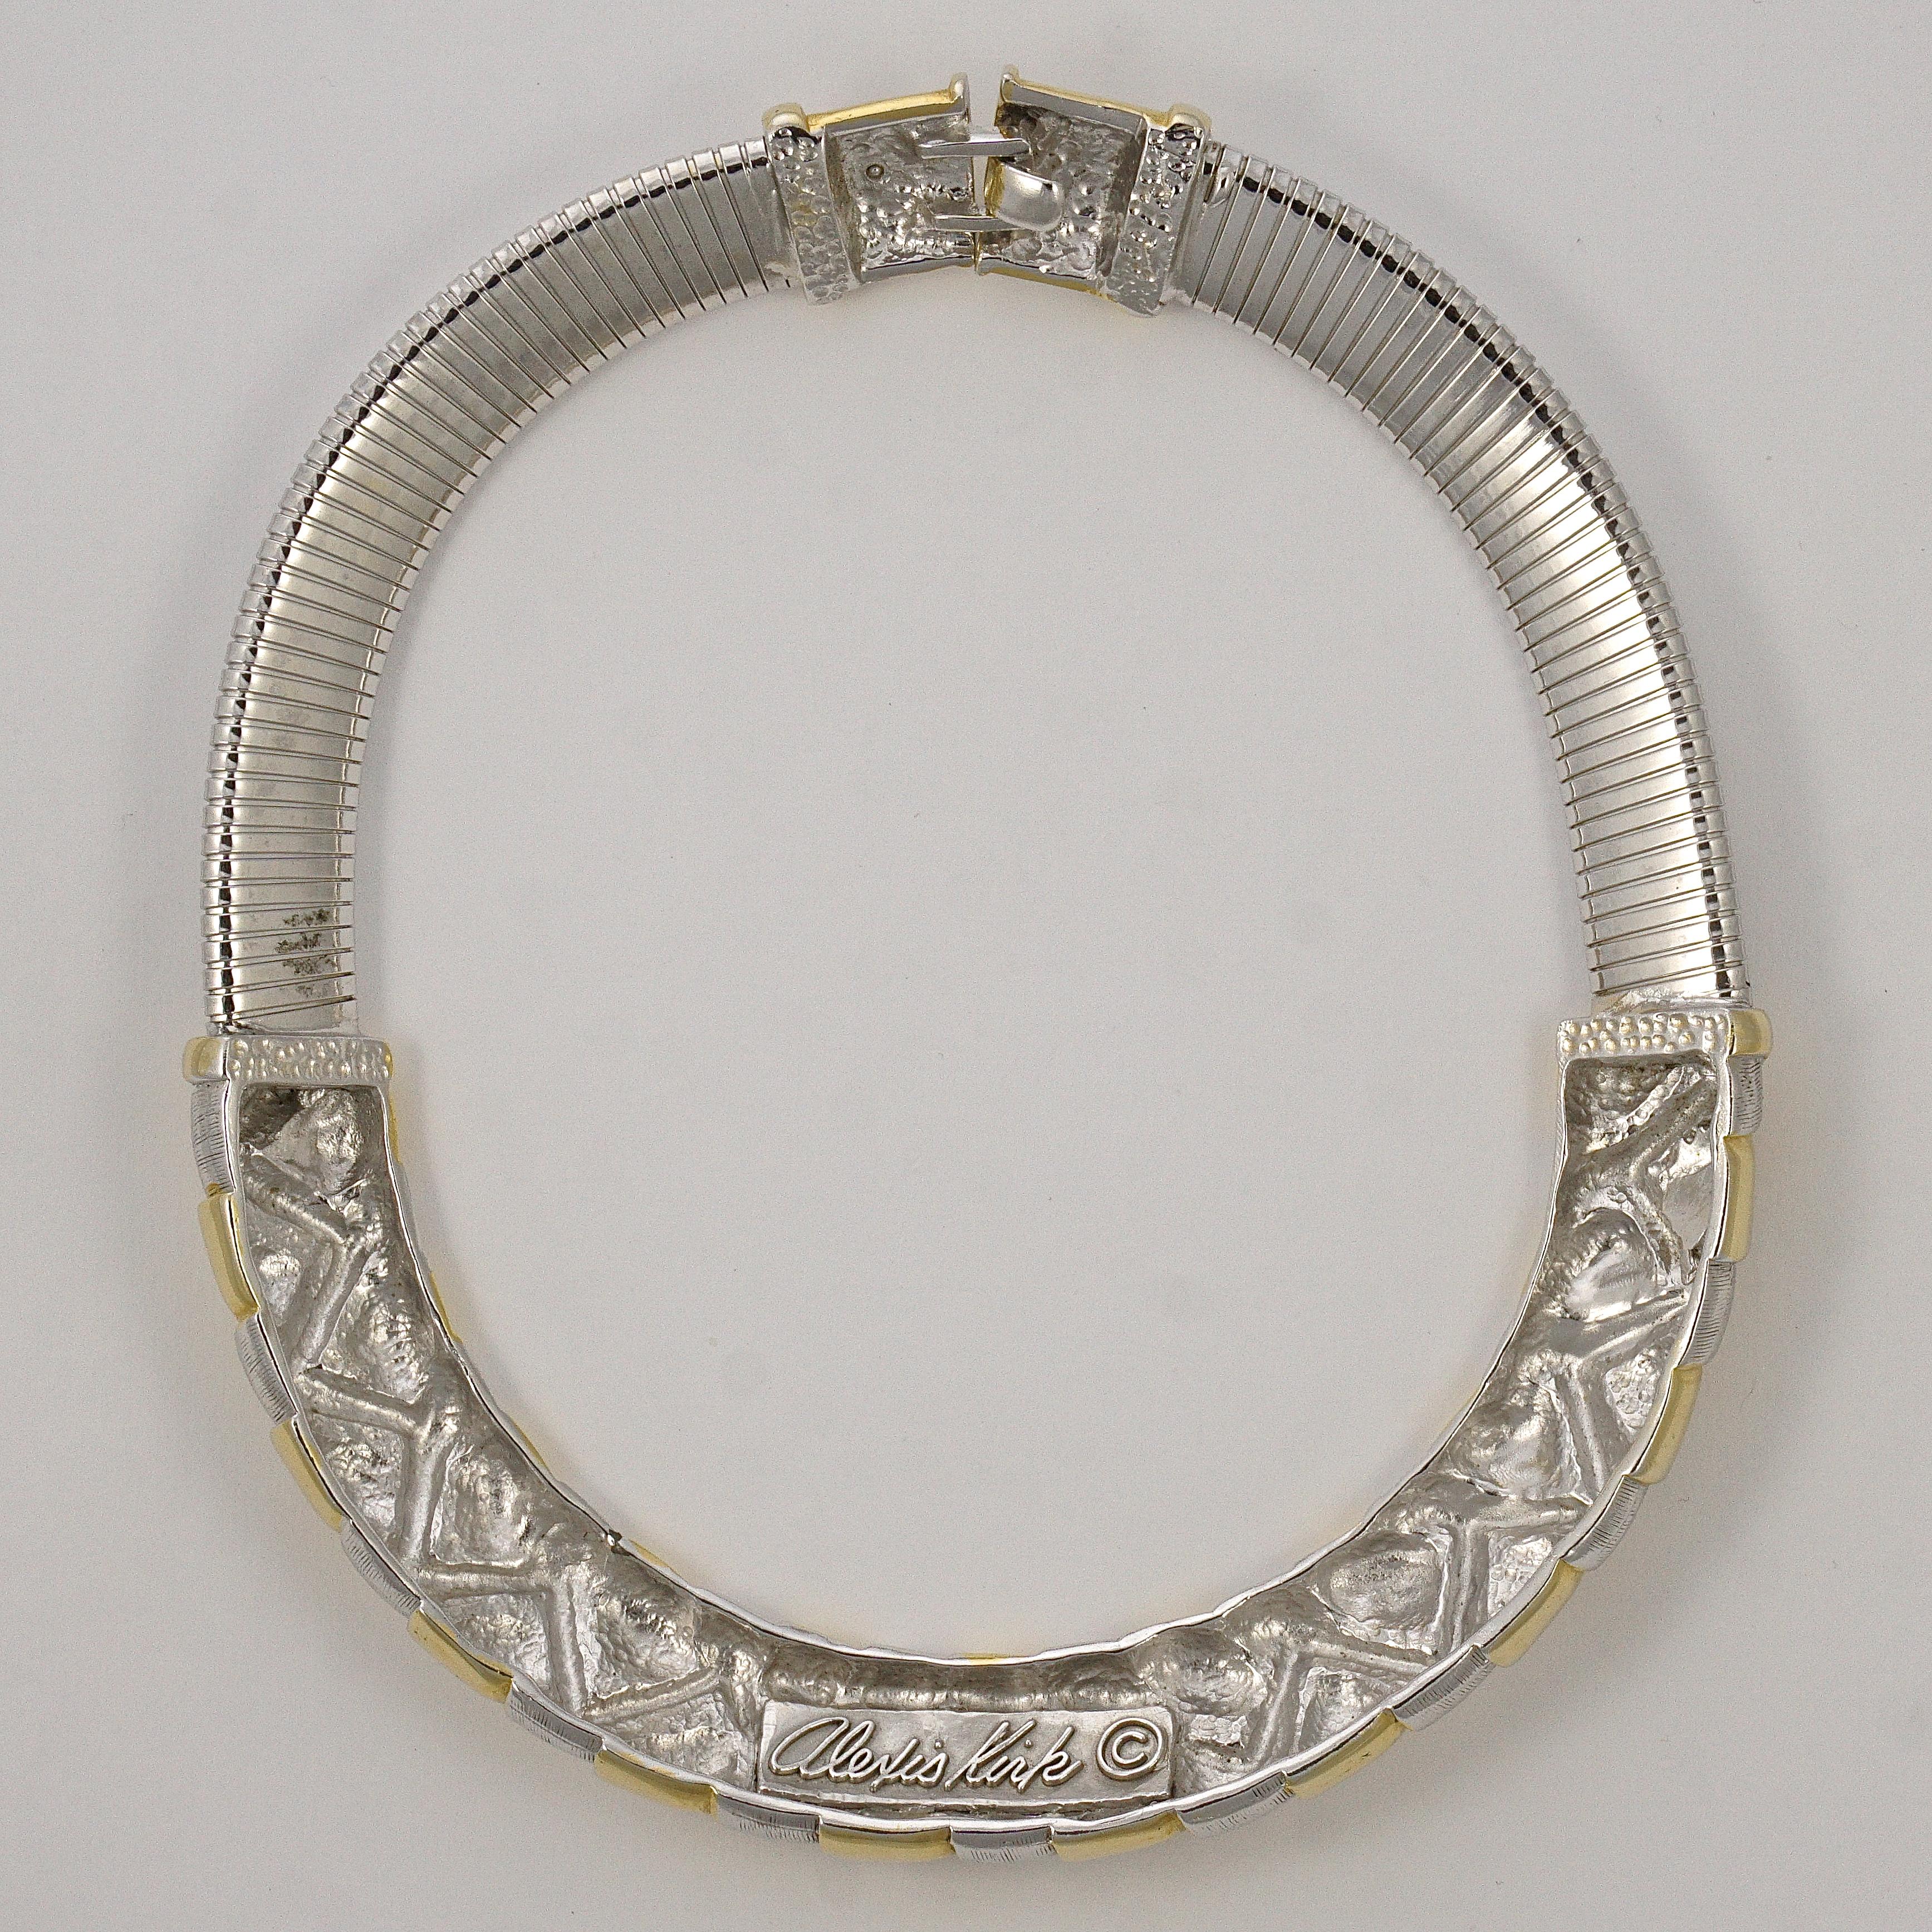 Women's or Men's Alexis Kirk Gold Tone and Silver Tone Statement Choker Necklace circa 1980s